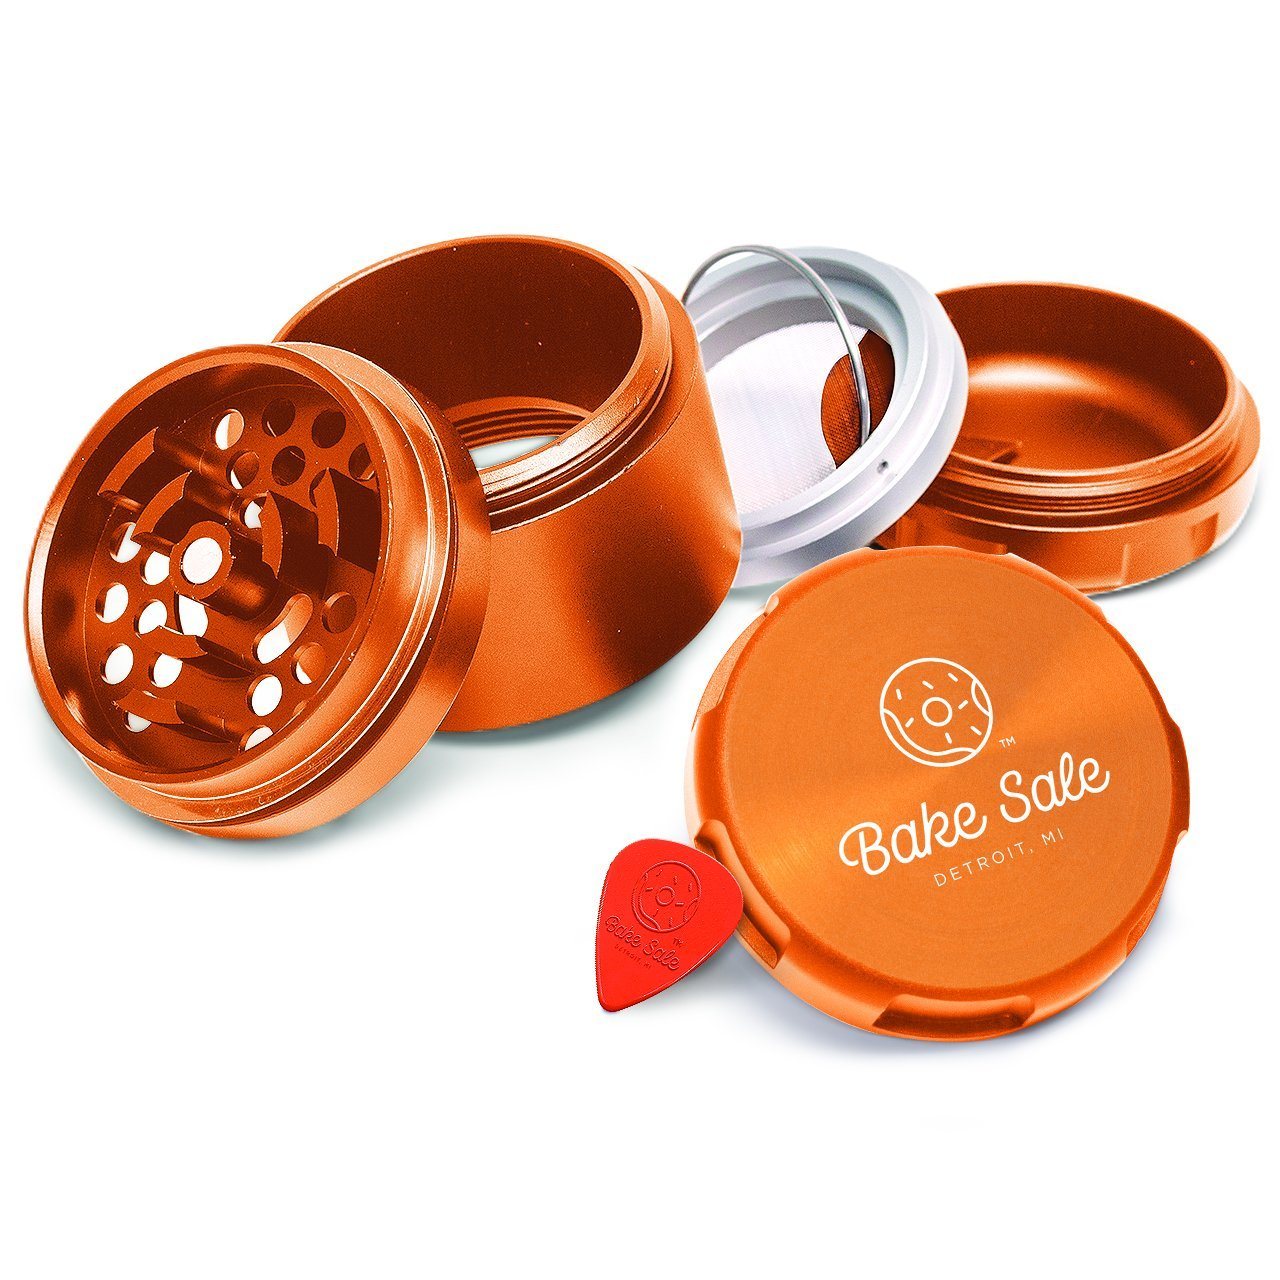 Bake Sale Aircraft Grade Aluminum Grinder W/Removable Magnetic Screen Various Colors Flower Power Packages Gold 